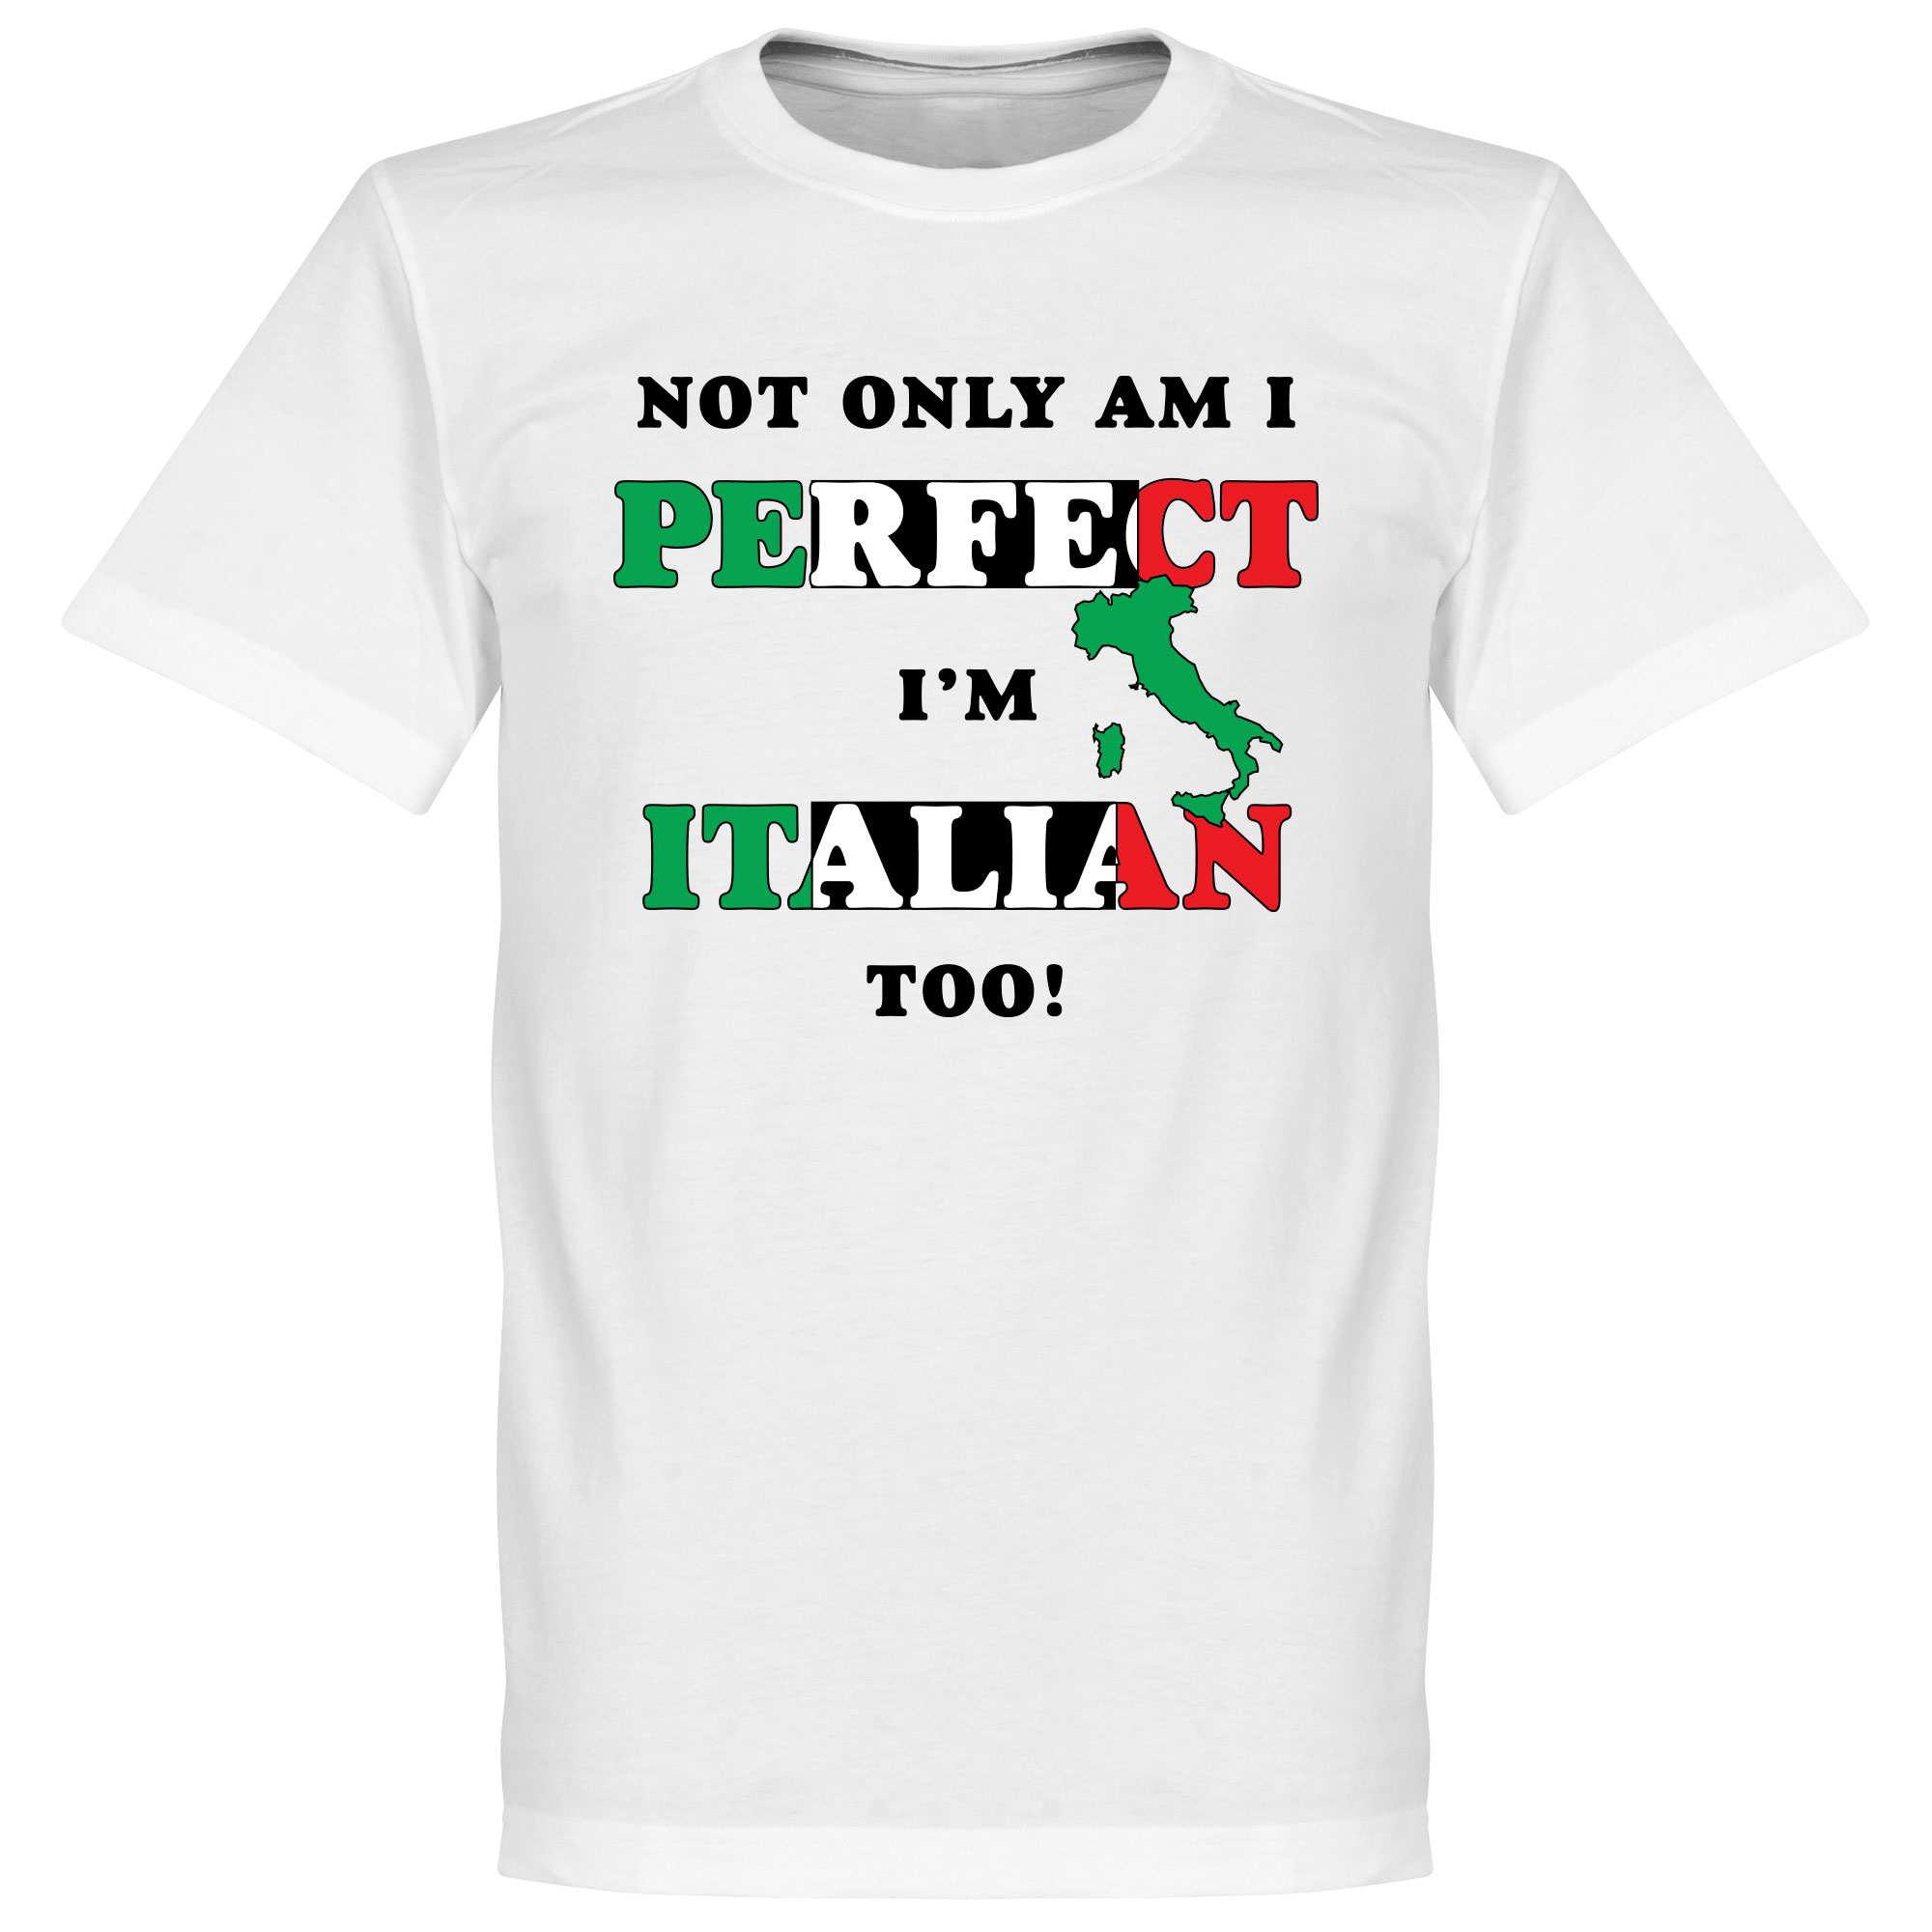 Not Only Am I Perfect, I'm Italian Too! T-Shirt KIDS